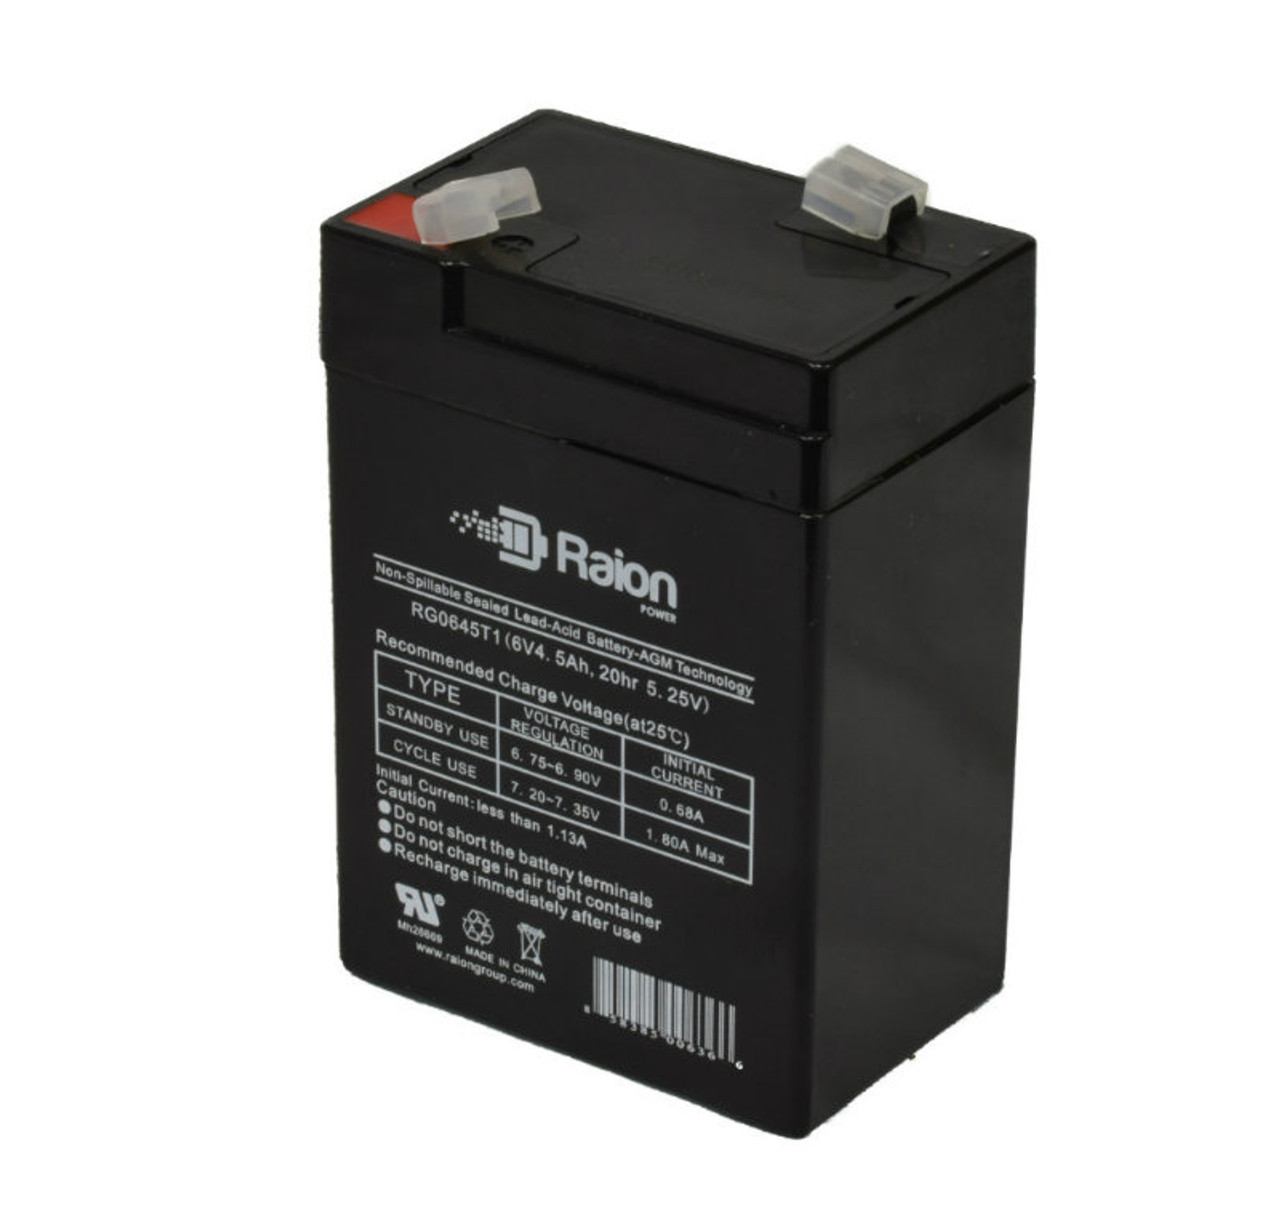 Raion Power RG0645T1 6V 4.5Ah Replacement Battery Cartridge for Long Way LW-3FM4.2